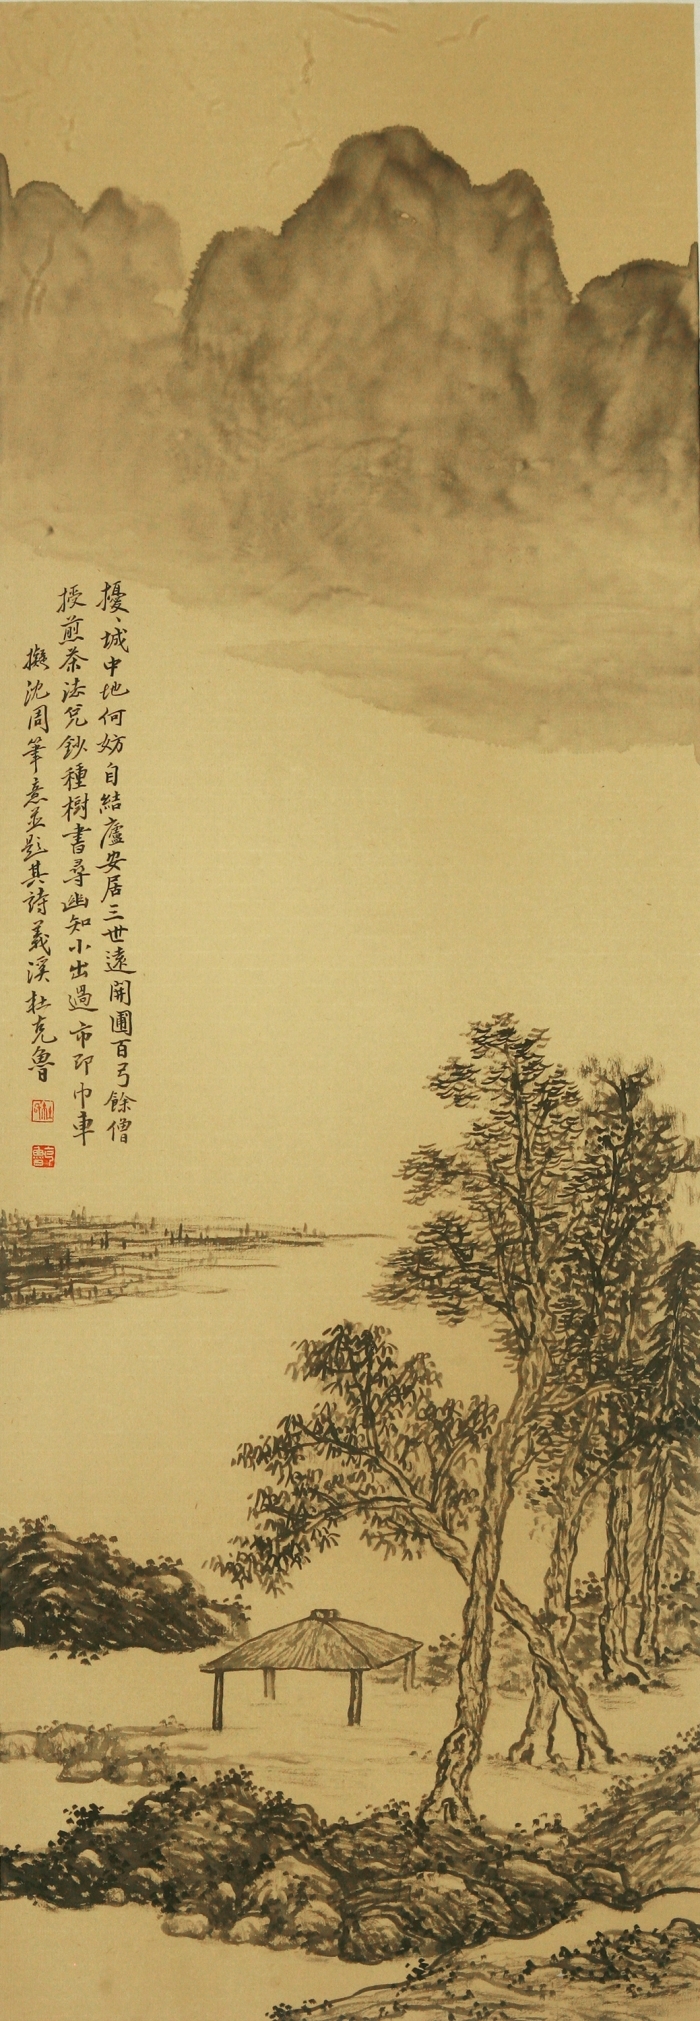 Hefeng Hall Gallery's Contemporary Chinese Painting - Learning form the Past 9